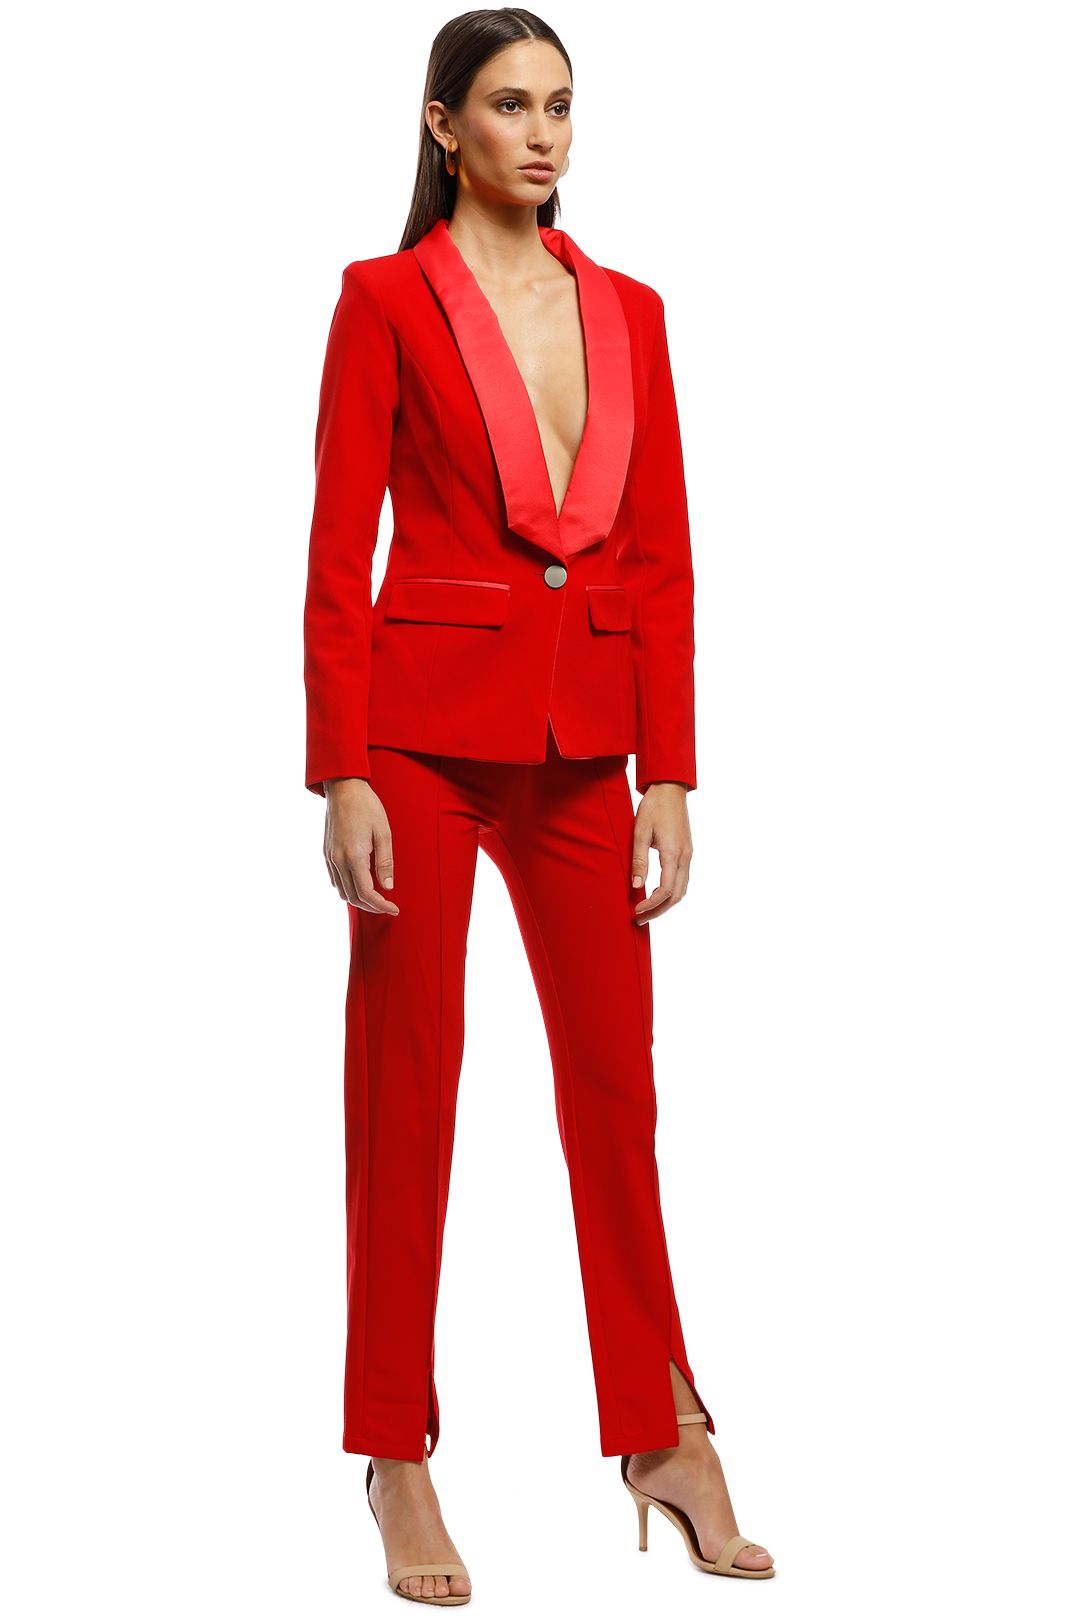 Milan Blazer and Pants in Red by Bianca and Bridgett for Rent